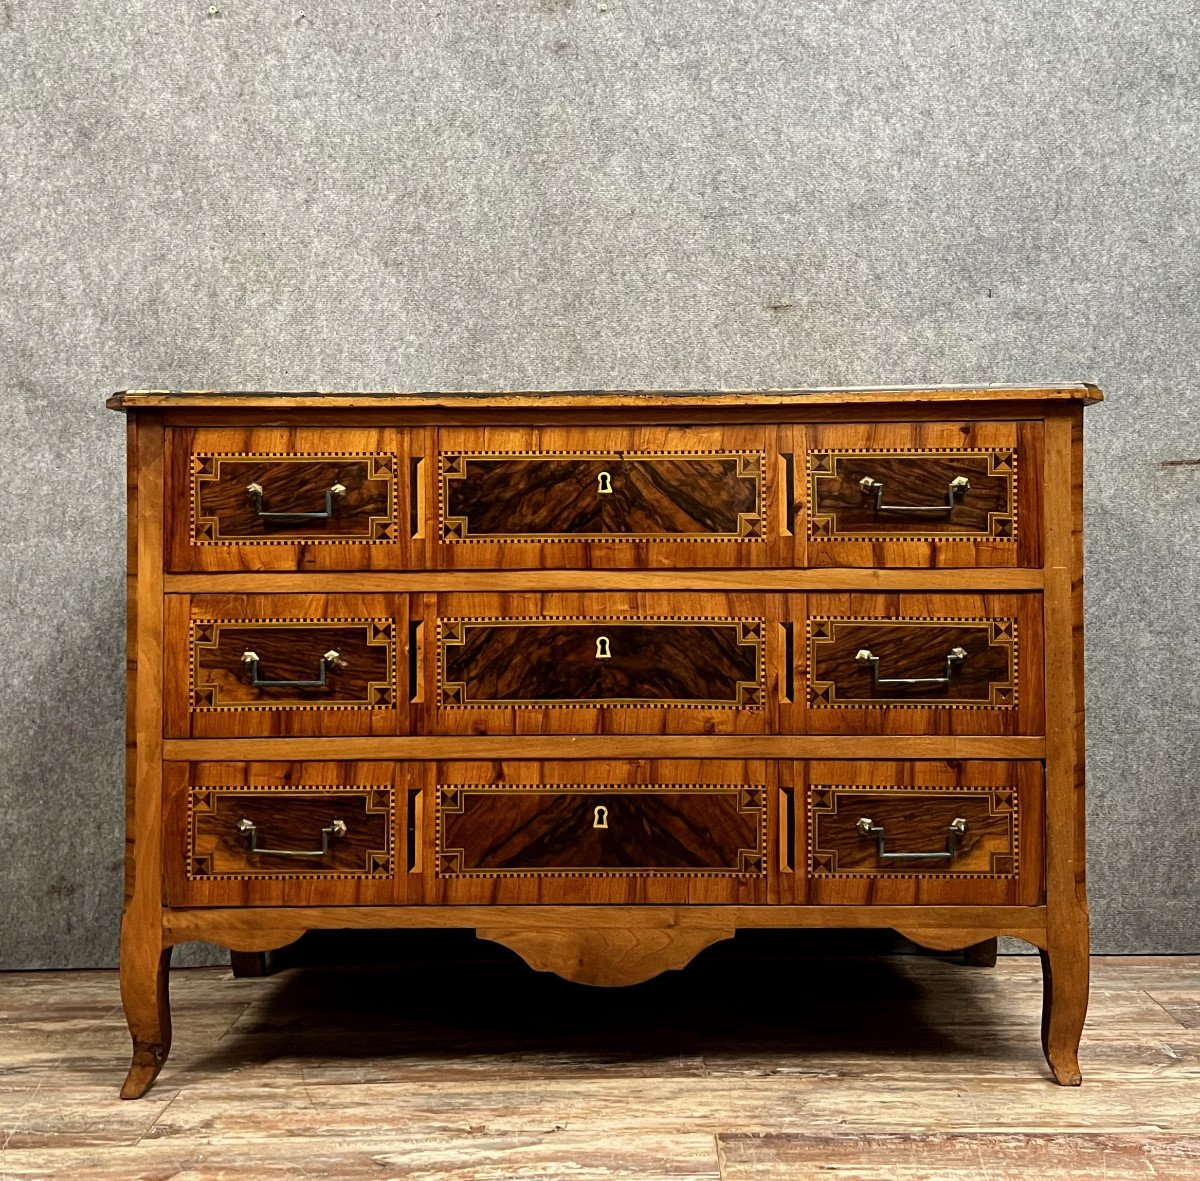 Louis XV / Louis XVI Transition Period Commode In Marquetry